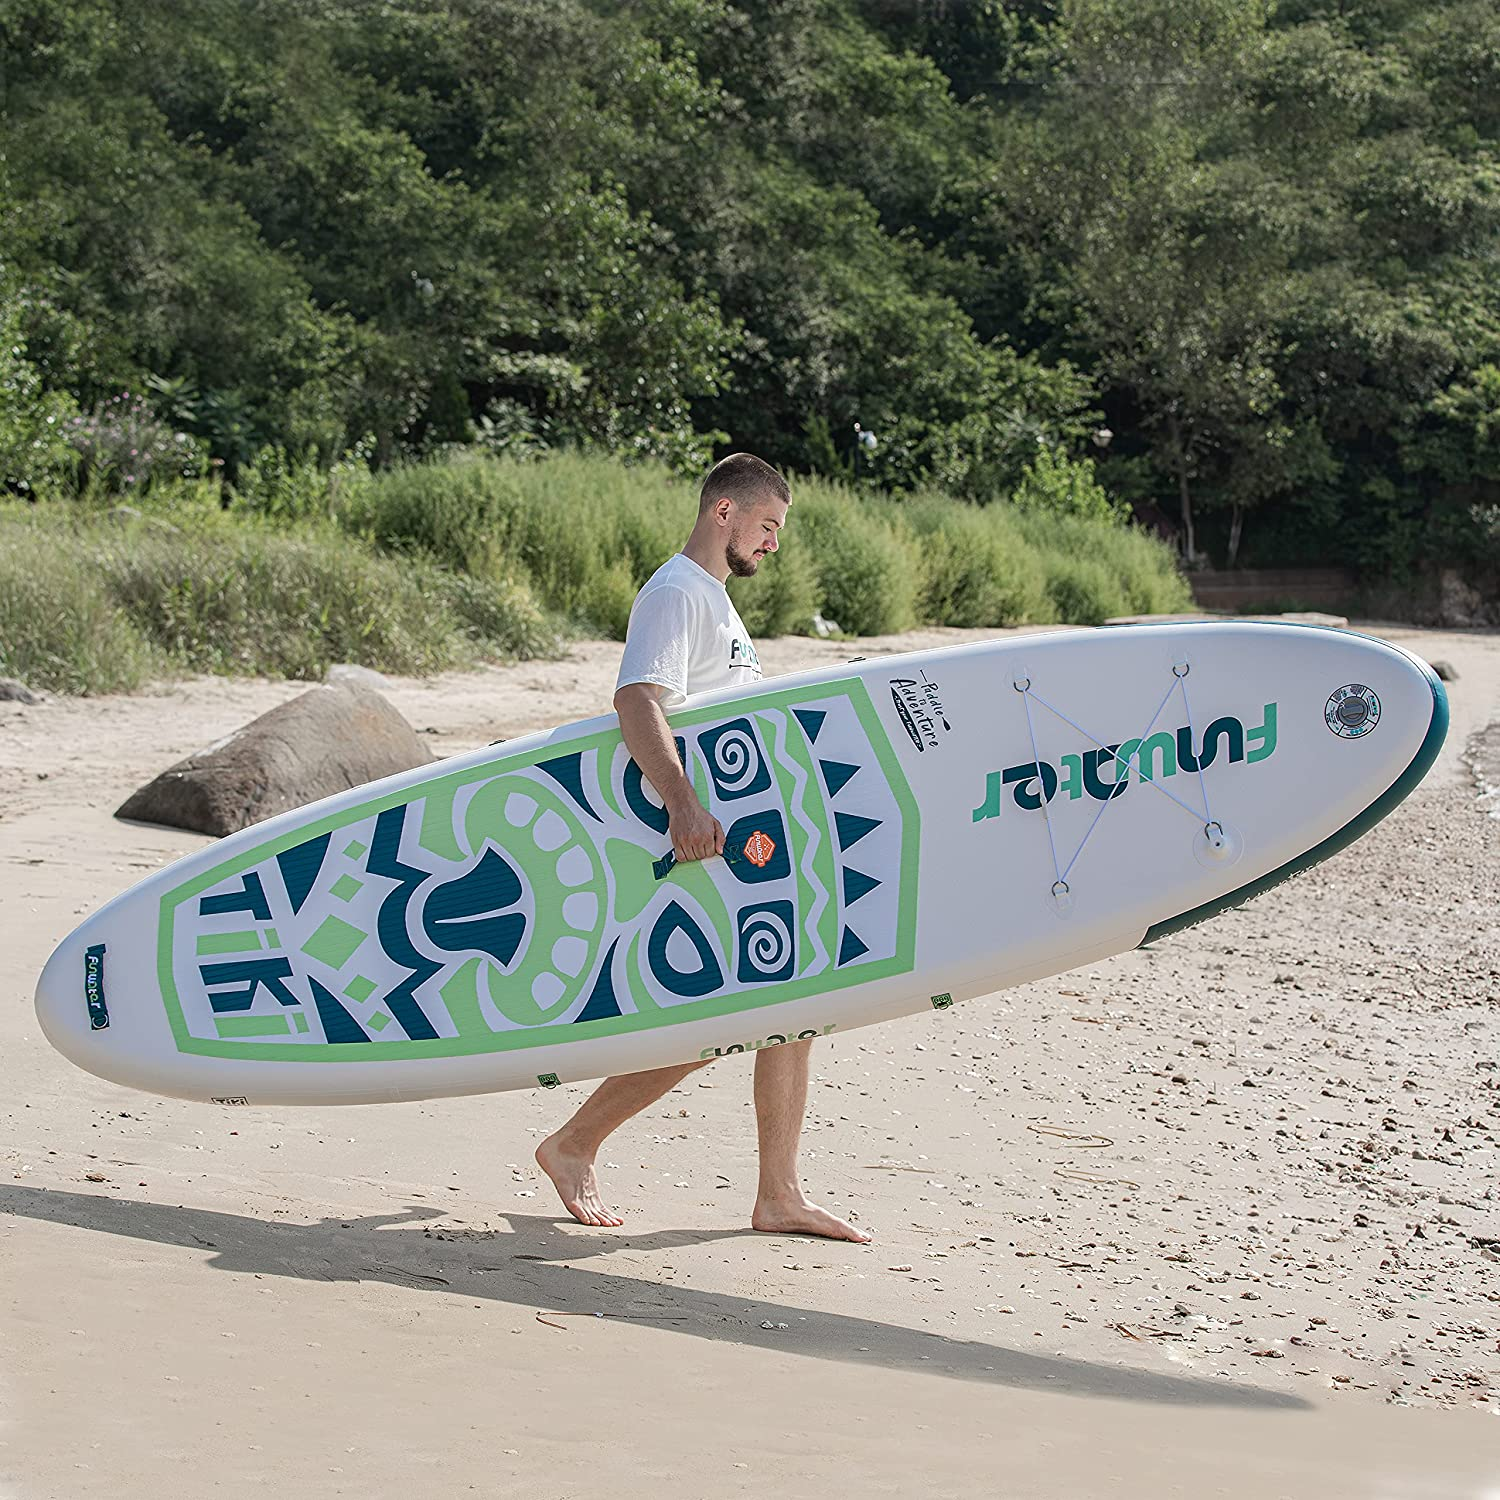 Inflatable Ultra-Light SUP For All Skill Levels